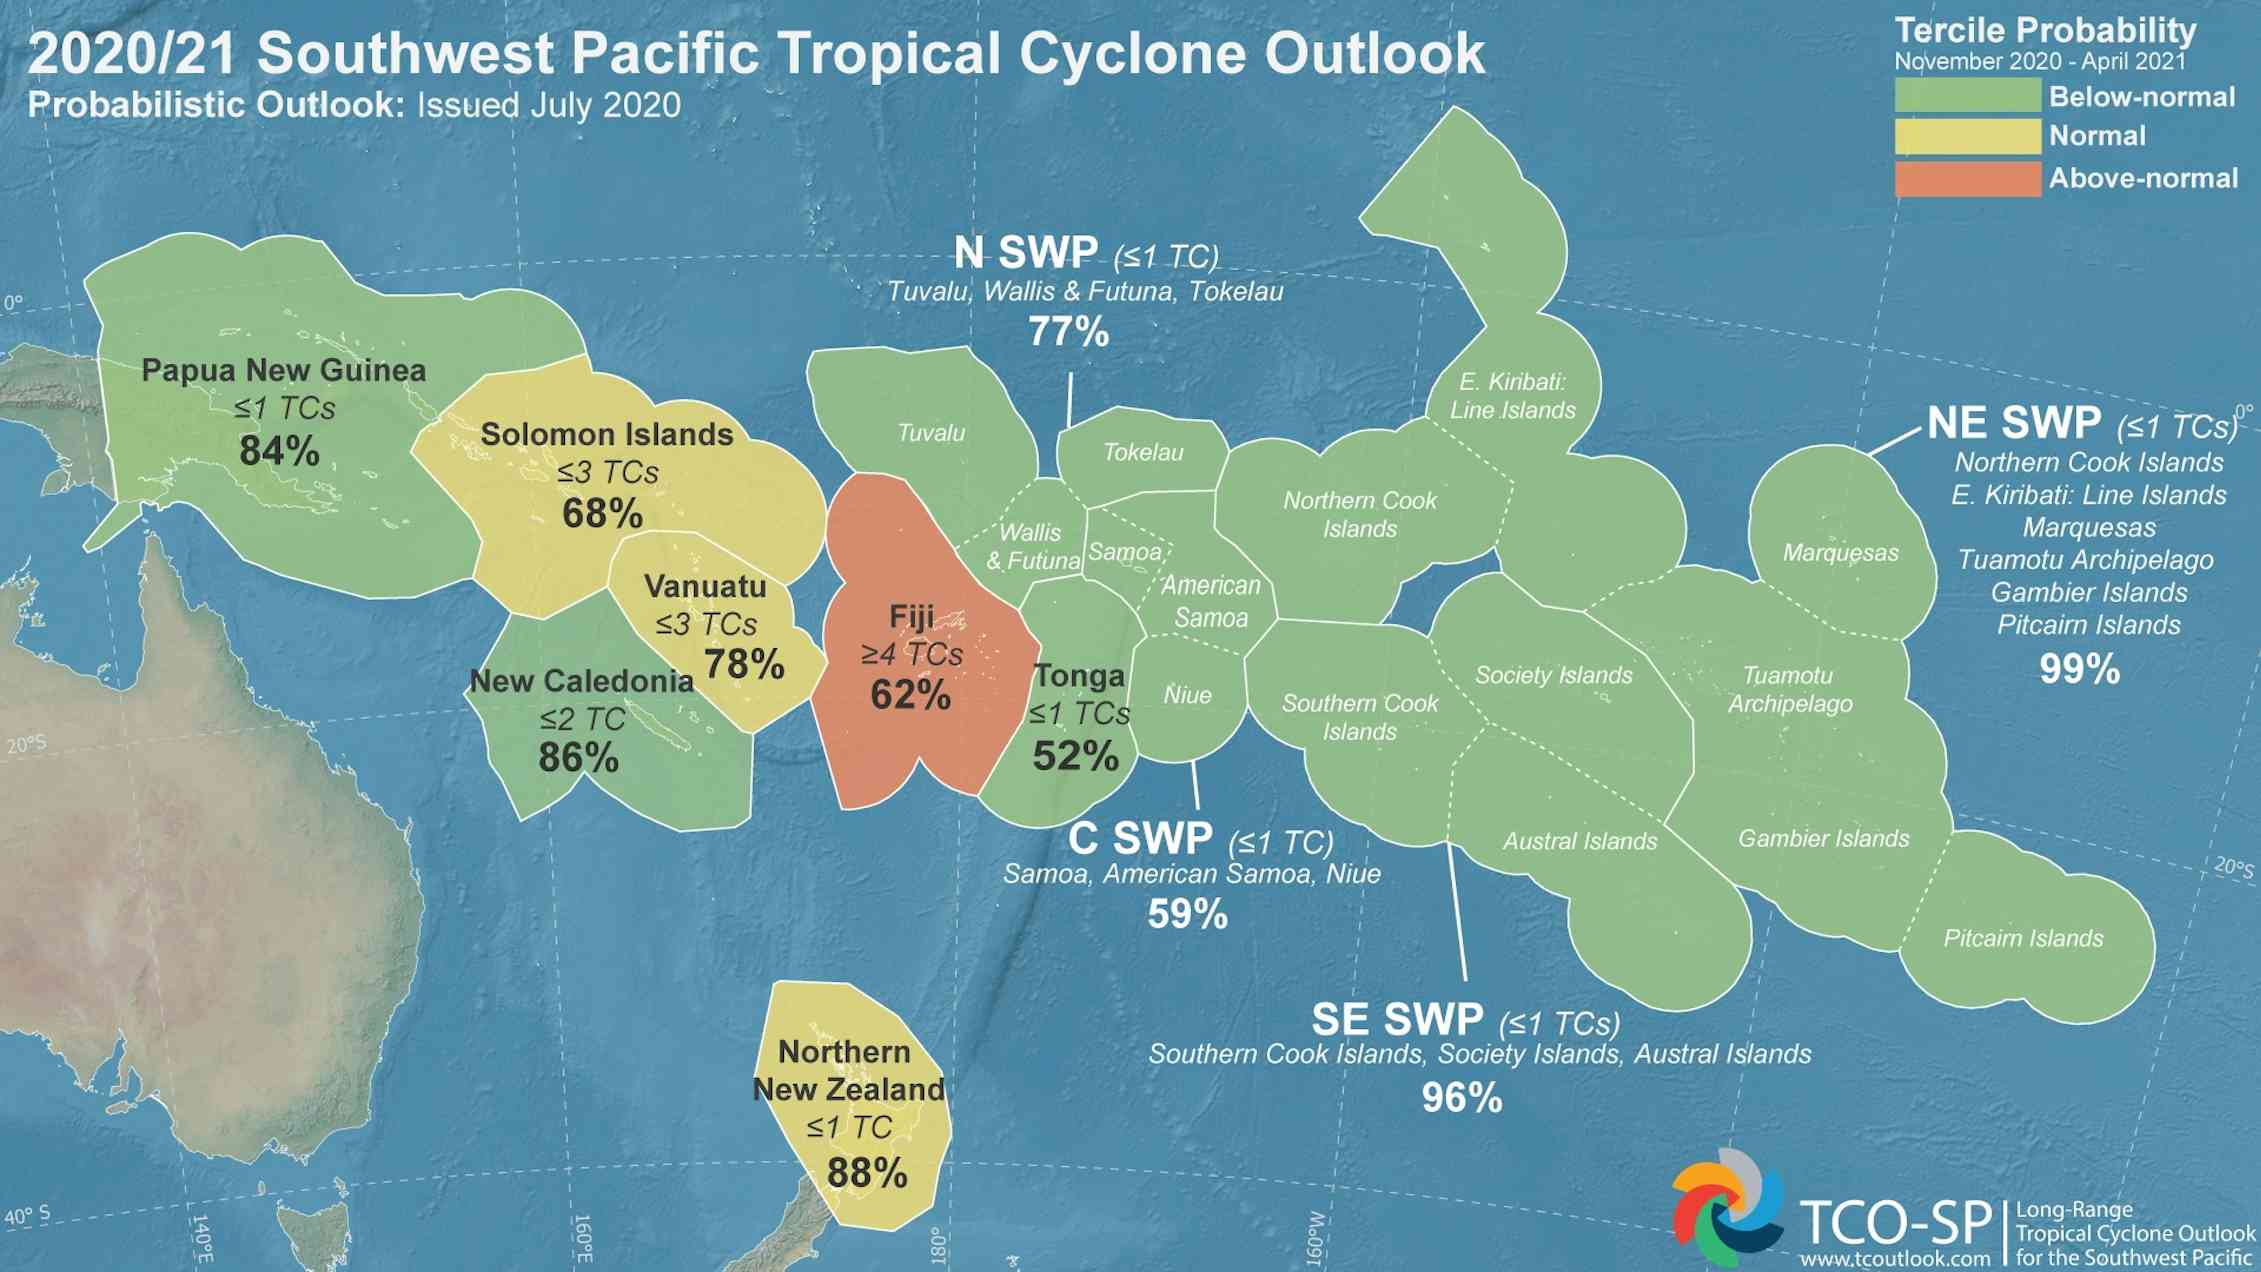 Storm warning: a new long-range tropical cyclone outlook is set to ...